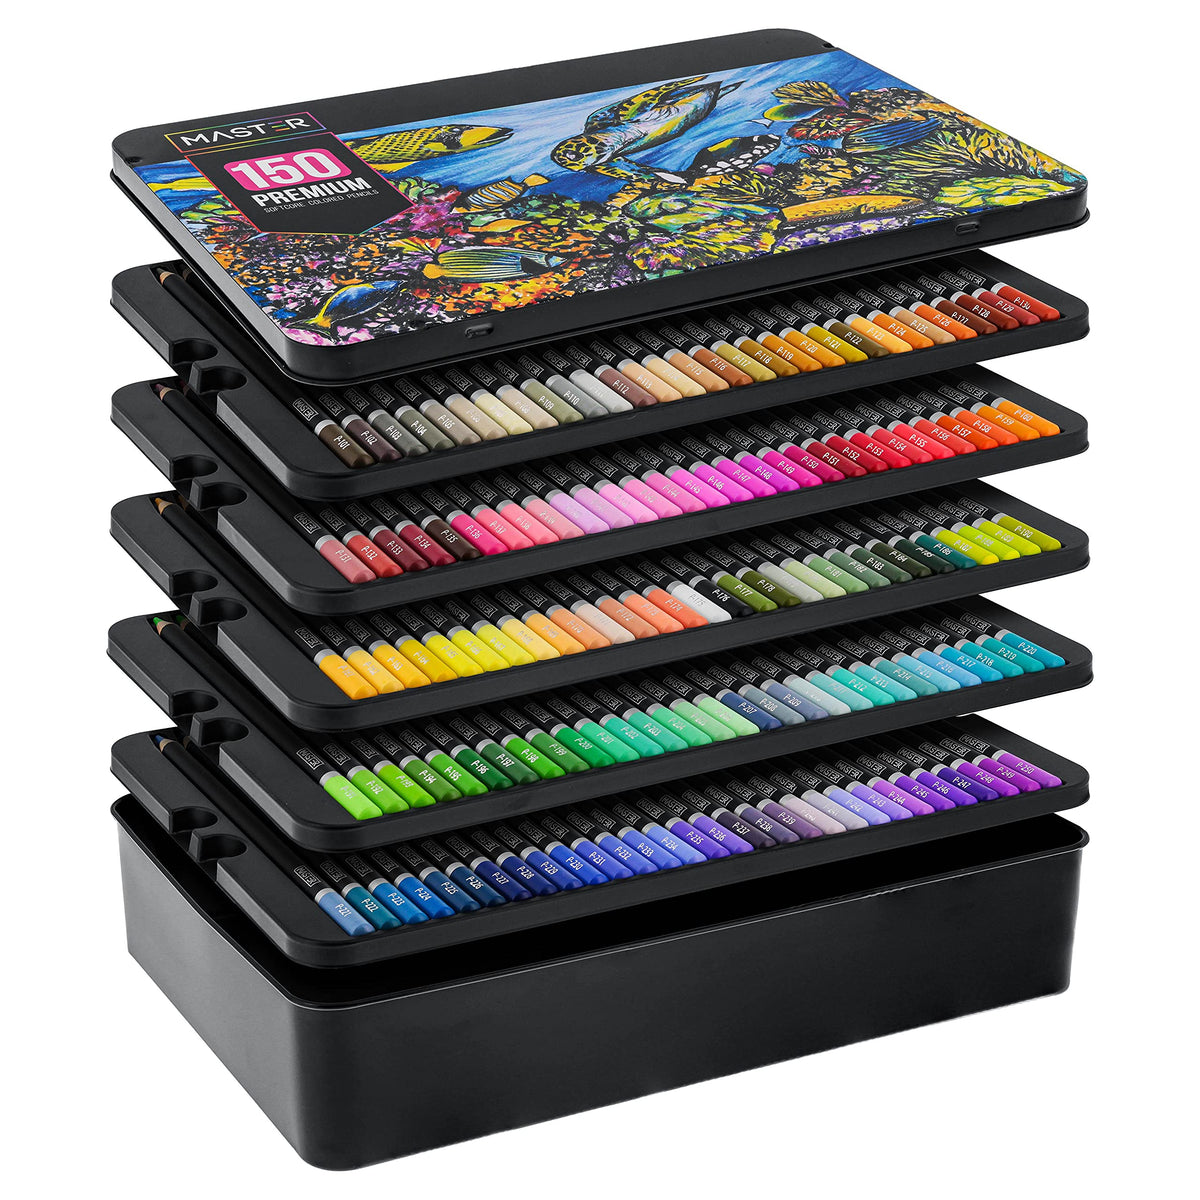 Cool Bank 160 Professional Colored Pencils, Artist Pencils Set for Coloring Books, Premium Artist Soft Series Lead with Vibrant Colors